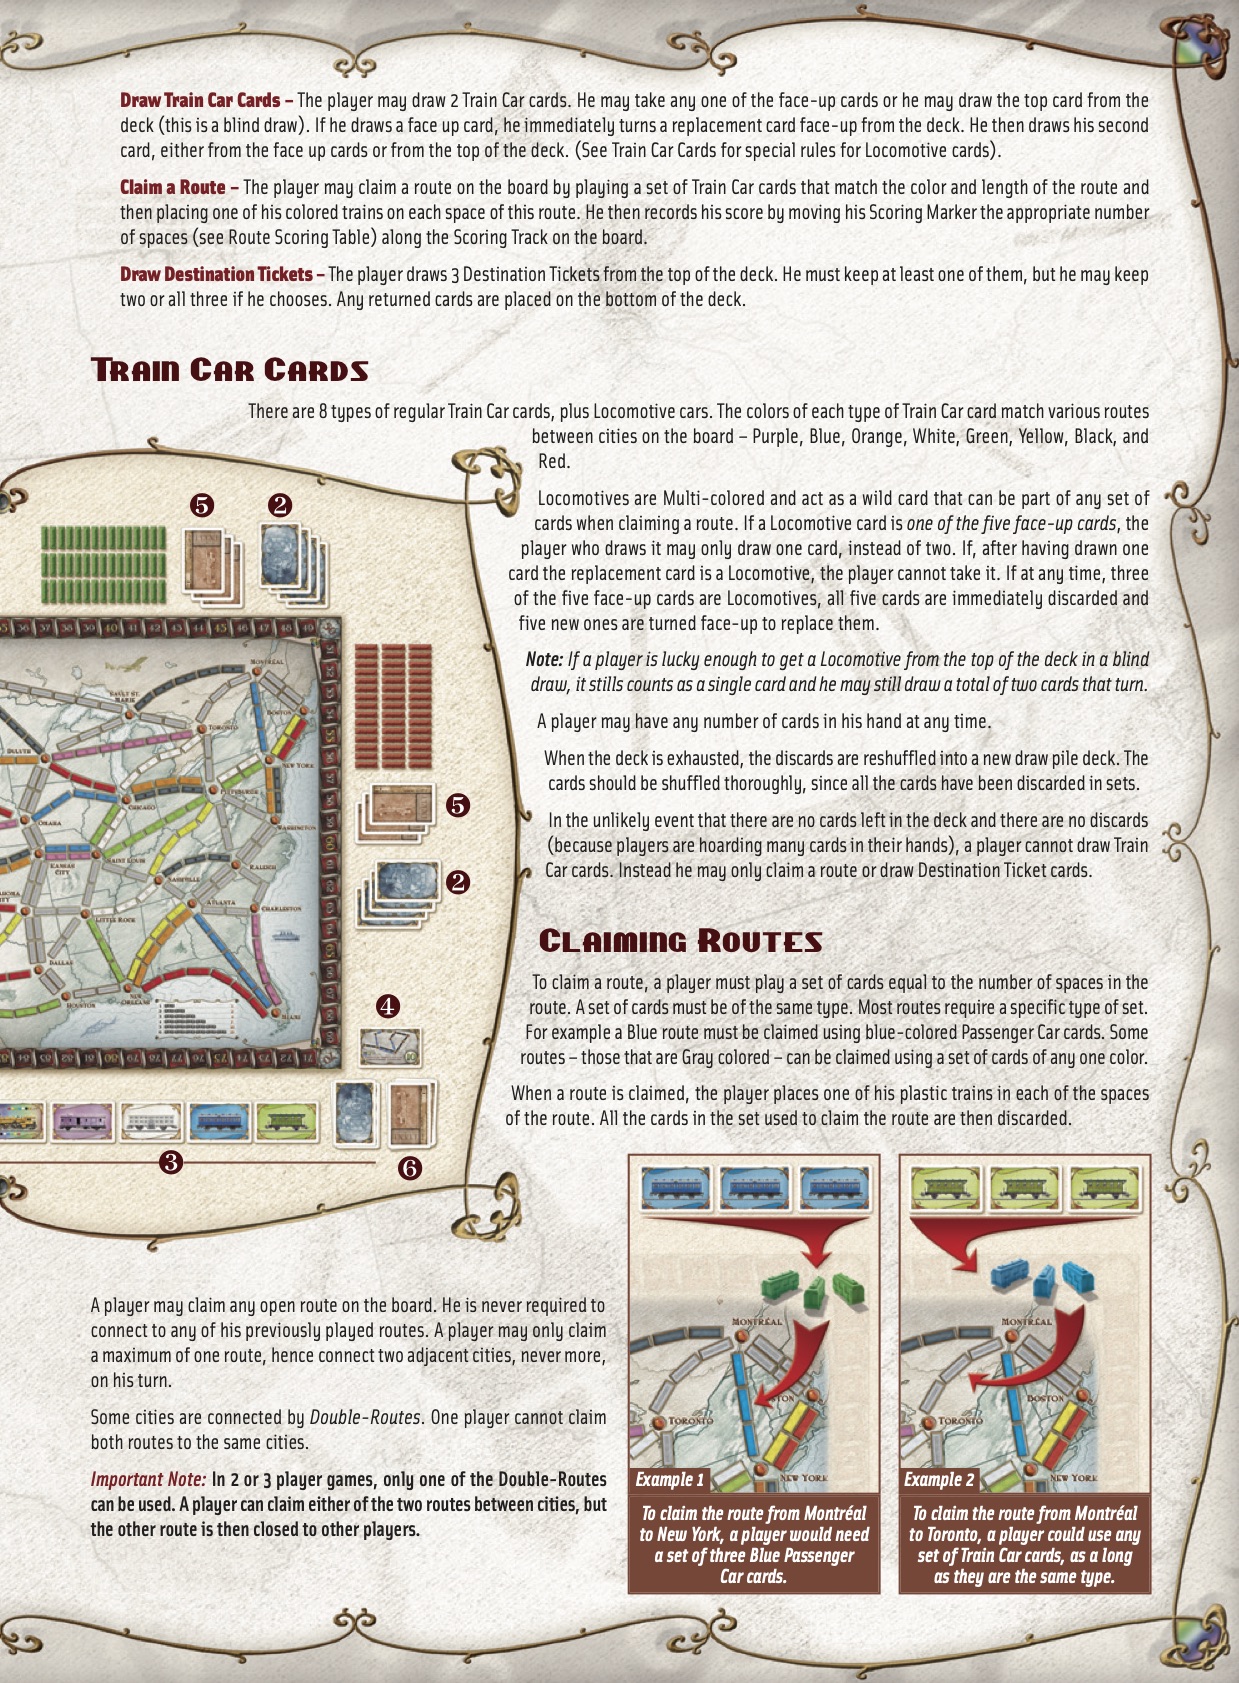 Page from Ticket to Ride rules